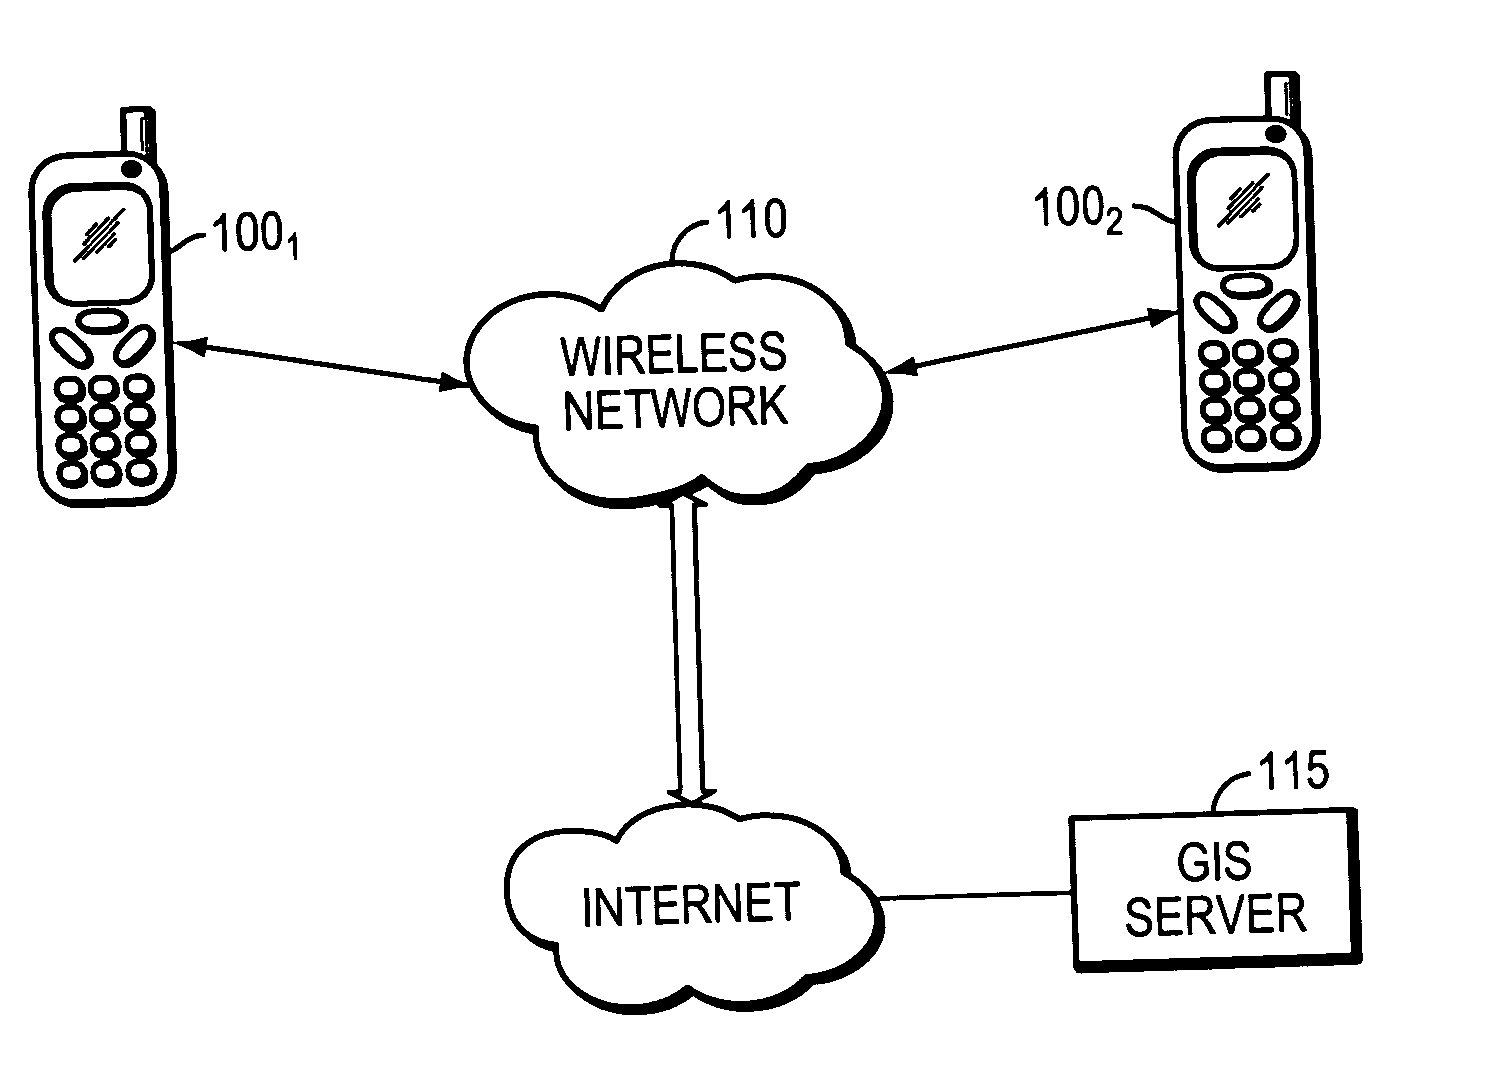 Implementation of serverless applications over wireless networks